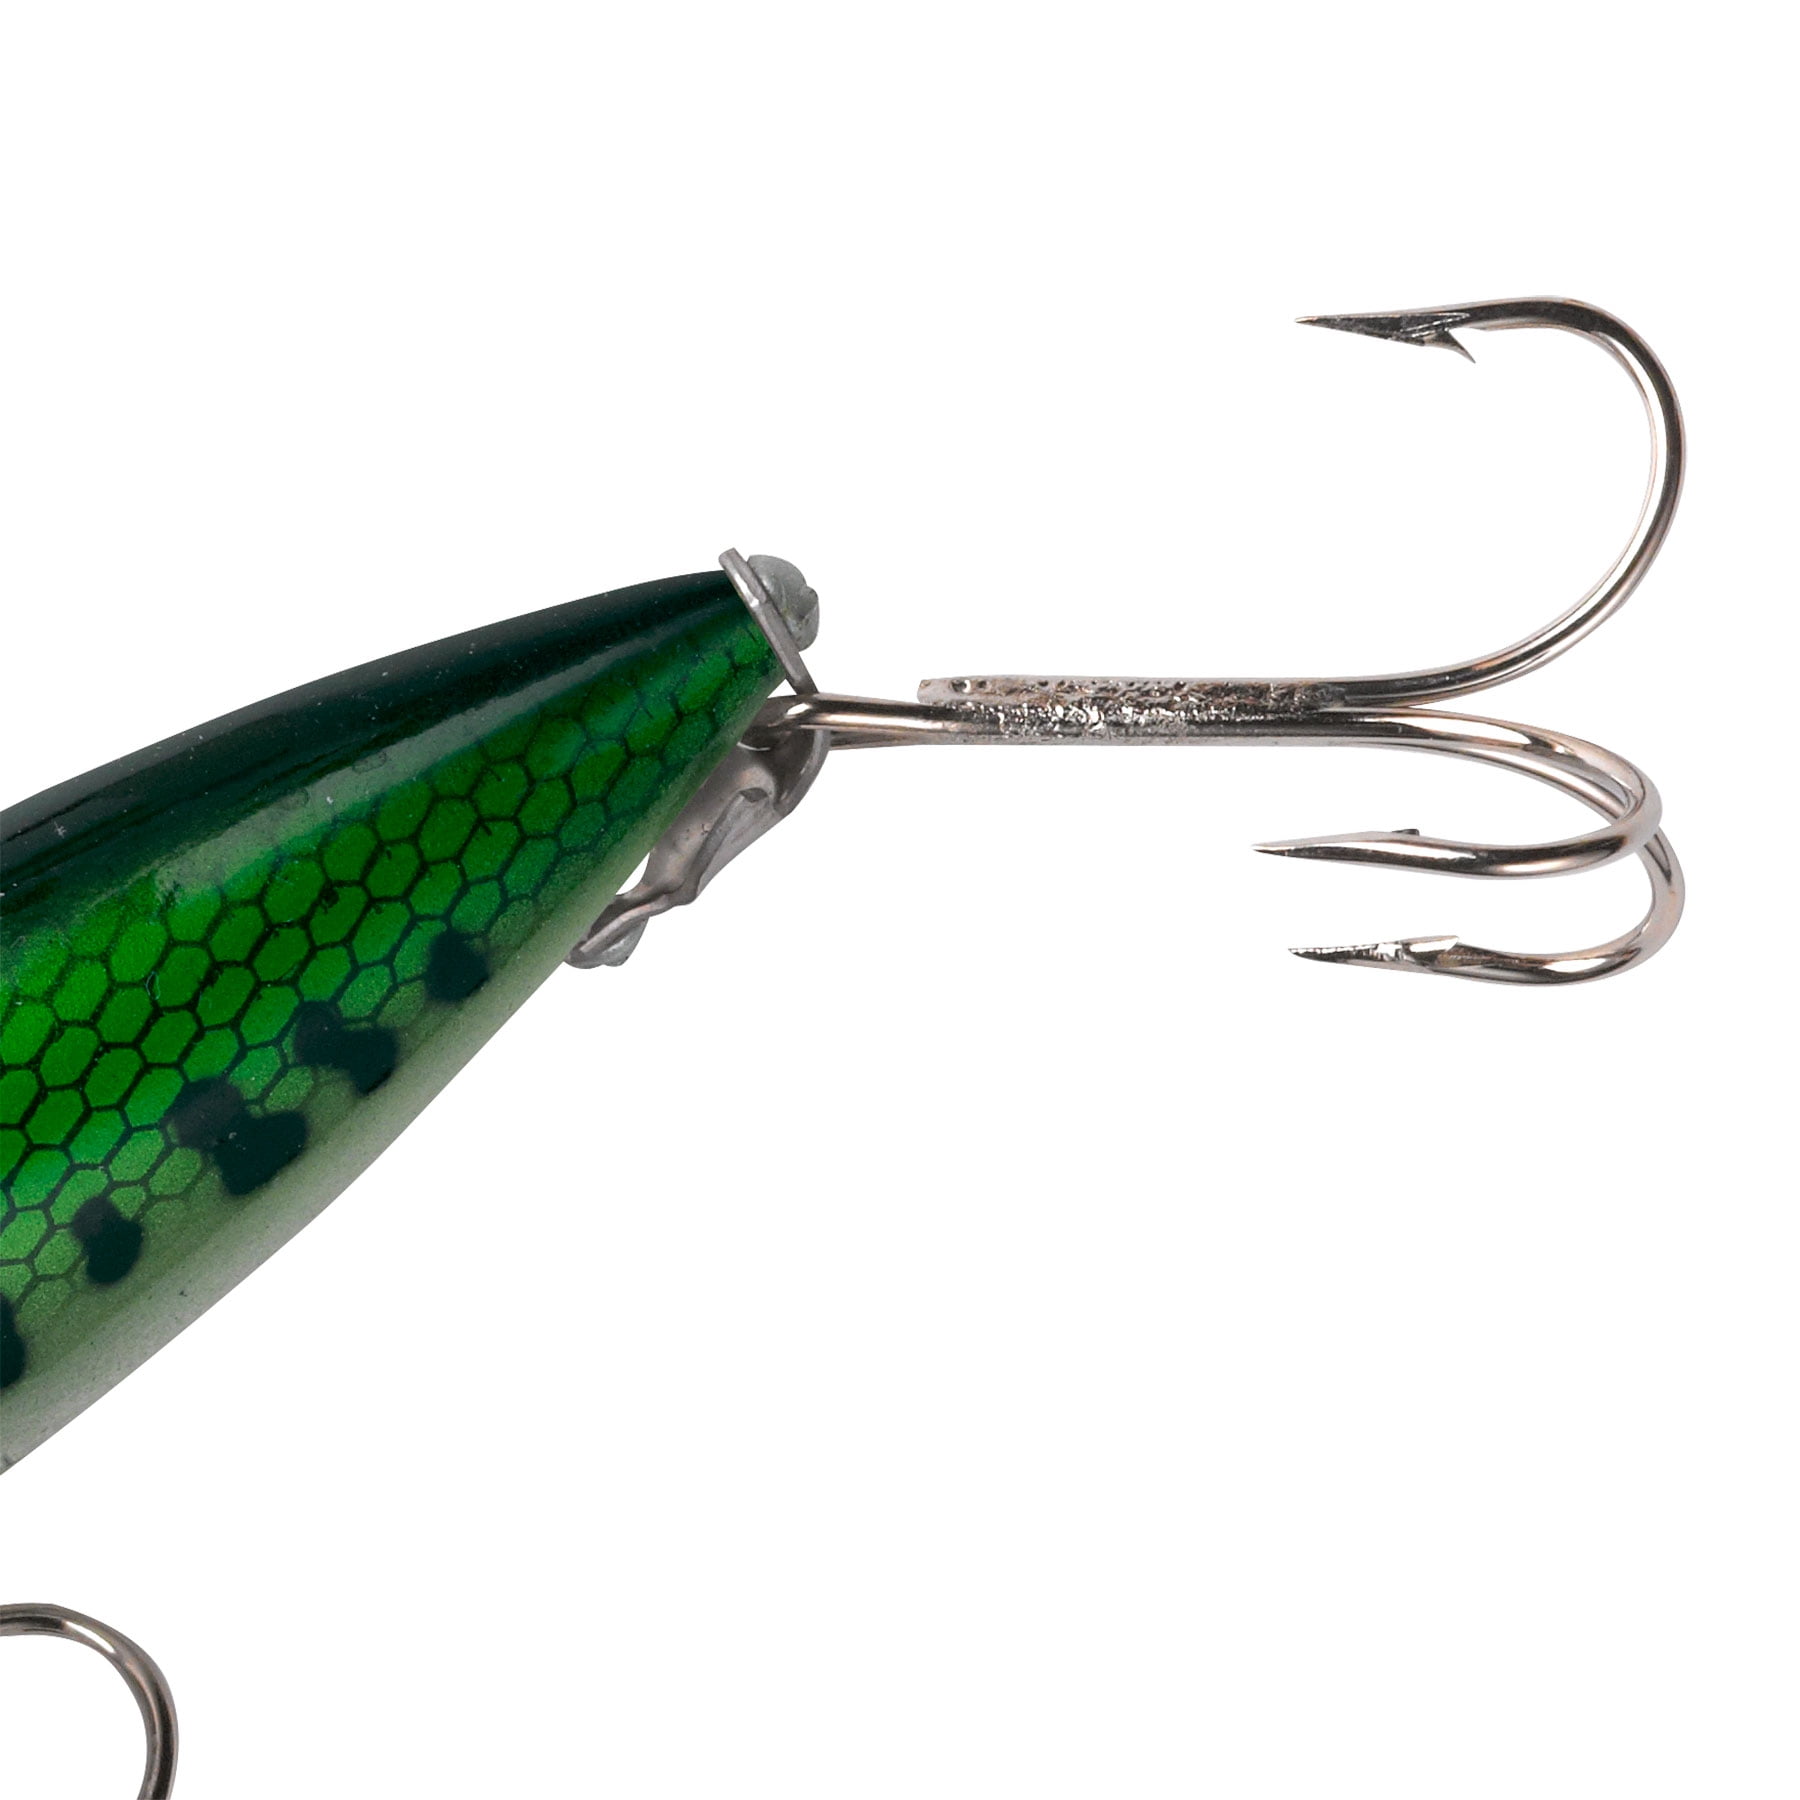 Gorgons Fishing Lure, Insects Fishing Lure